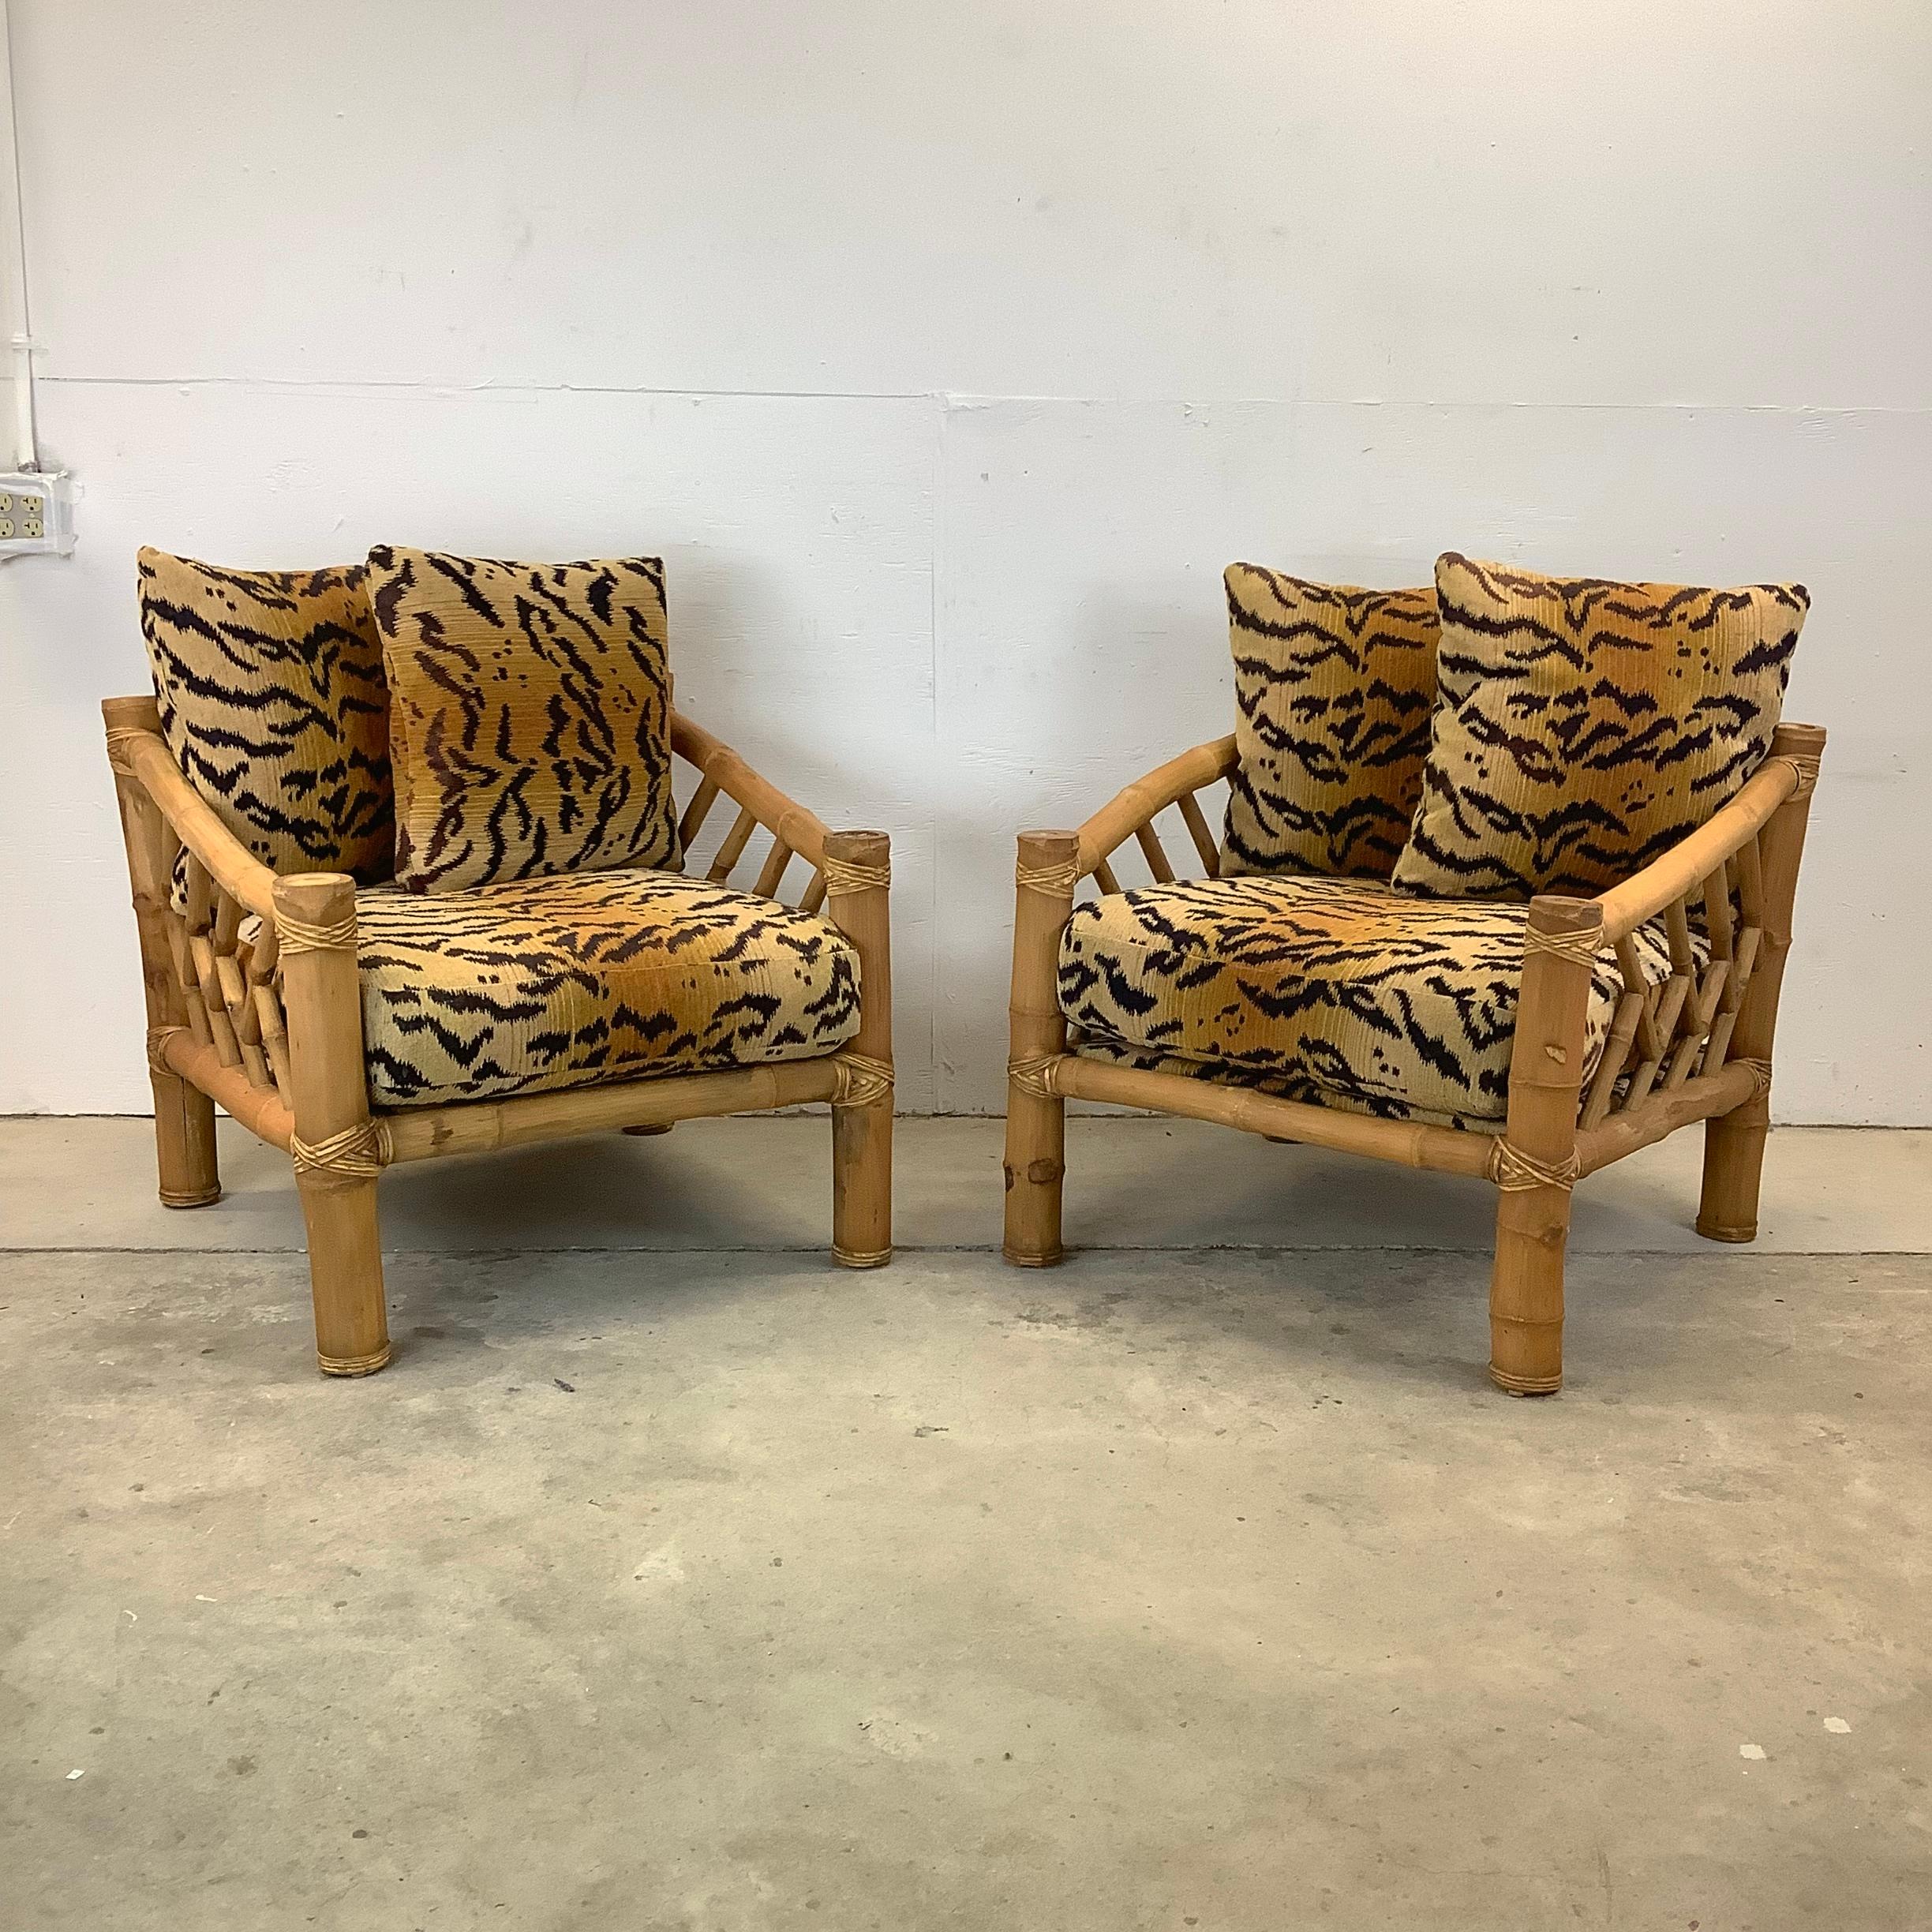 Other Pair Vintage Bamboo Armchairs & Ottoman in Tiger Print For Sale